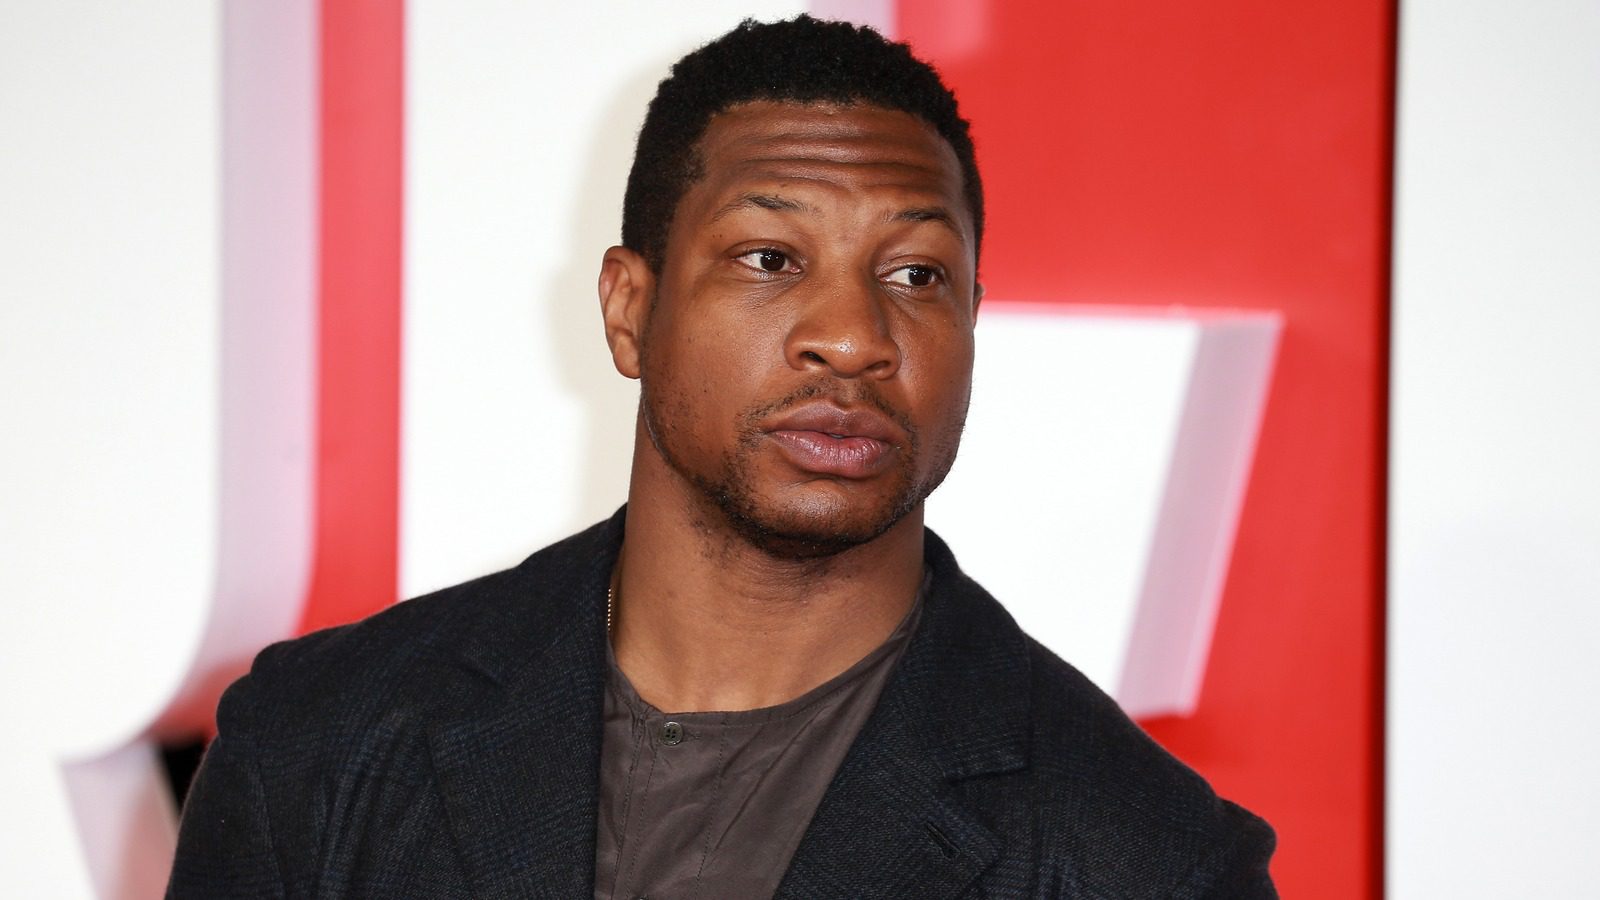 Jonathan Majors' Lawyer Says Video Evidence Will Prove The MCU Actor's Innocence